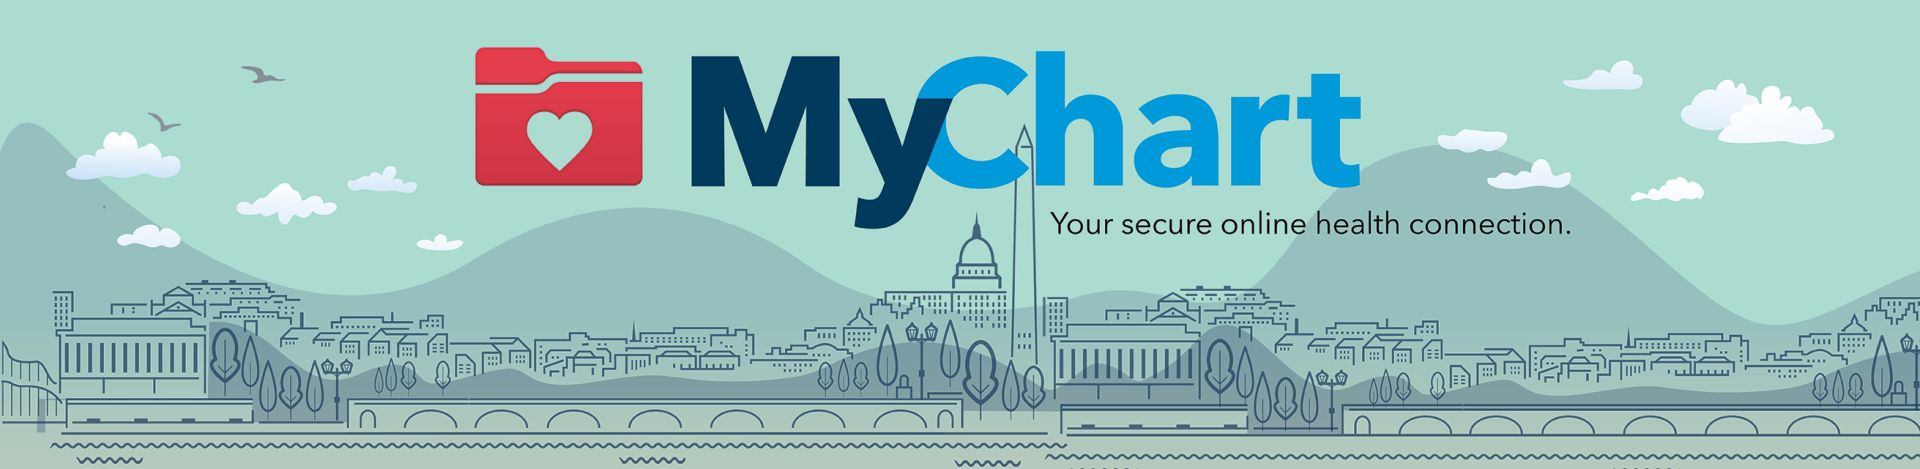 MyChart - Your secure online health connection | illustrated DC skyline